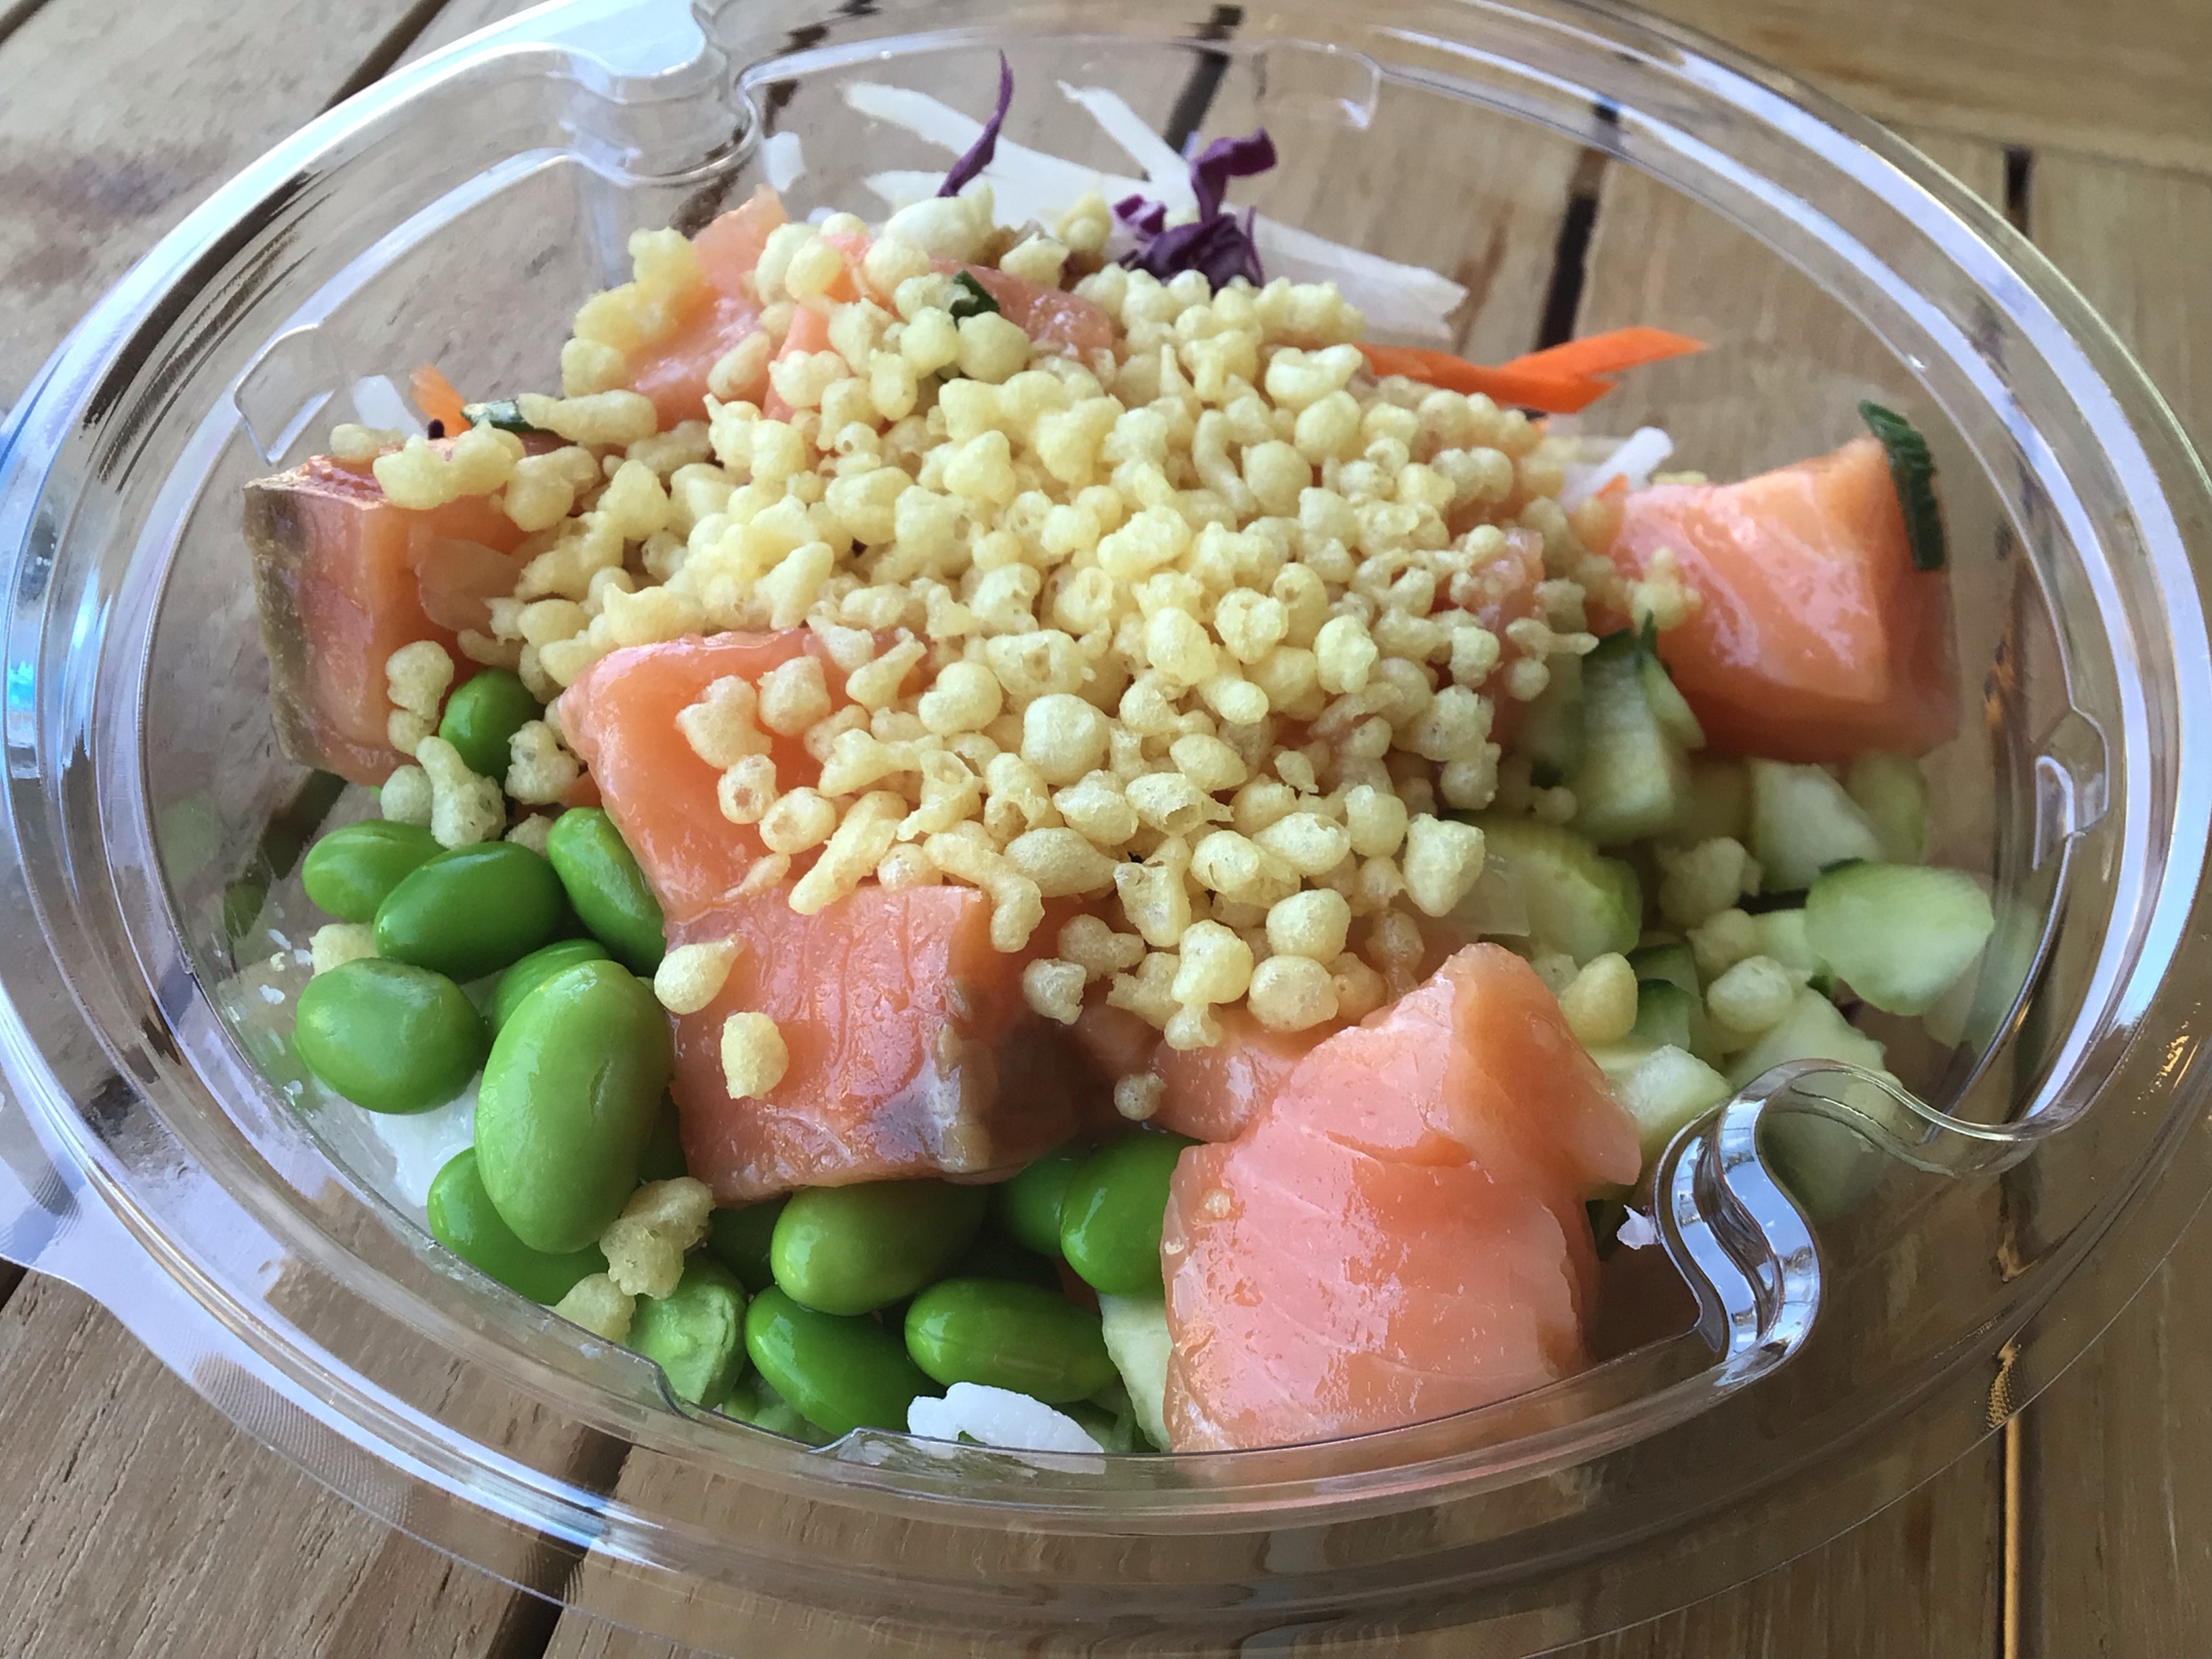 Poke Shack handles a variety of Pacific-inspired dishes with ease